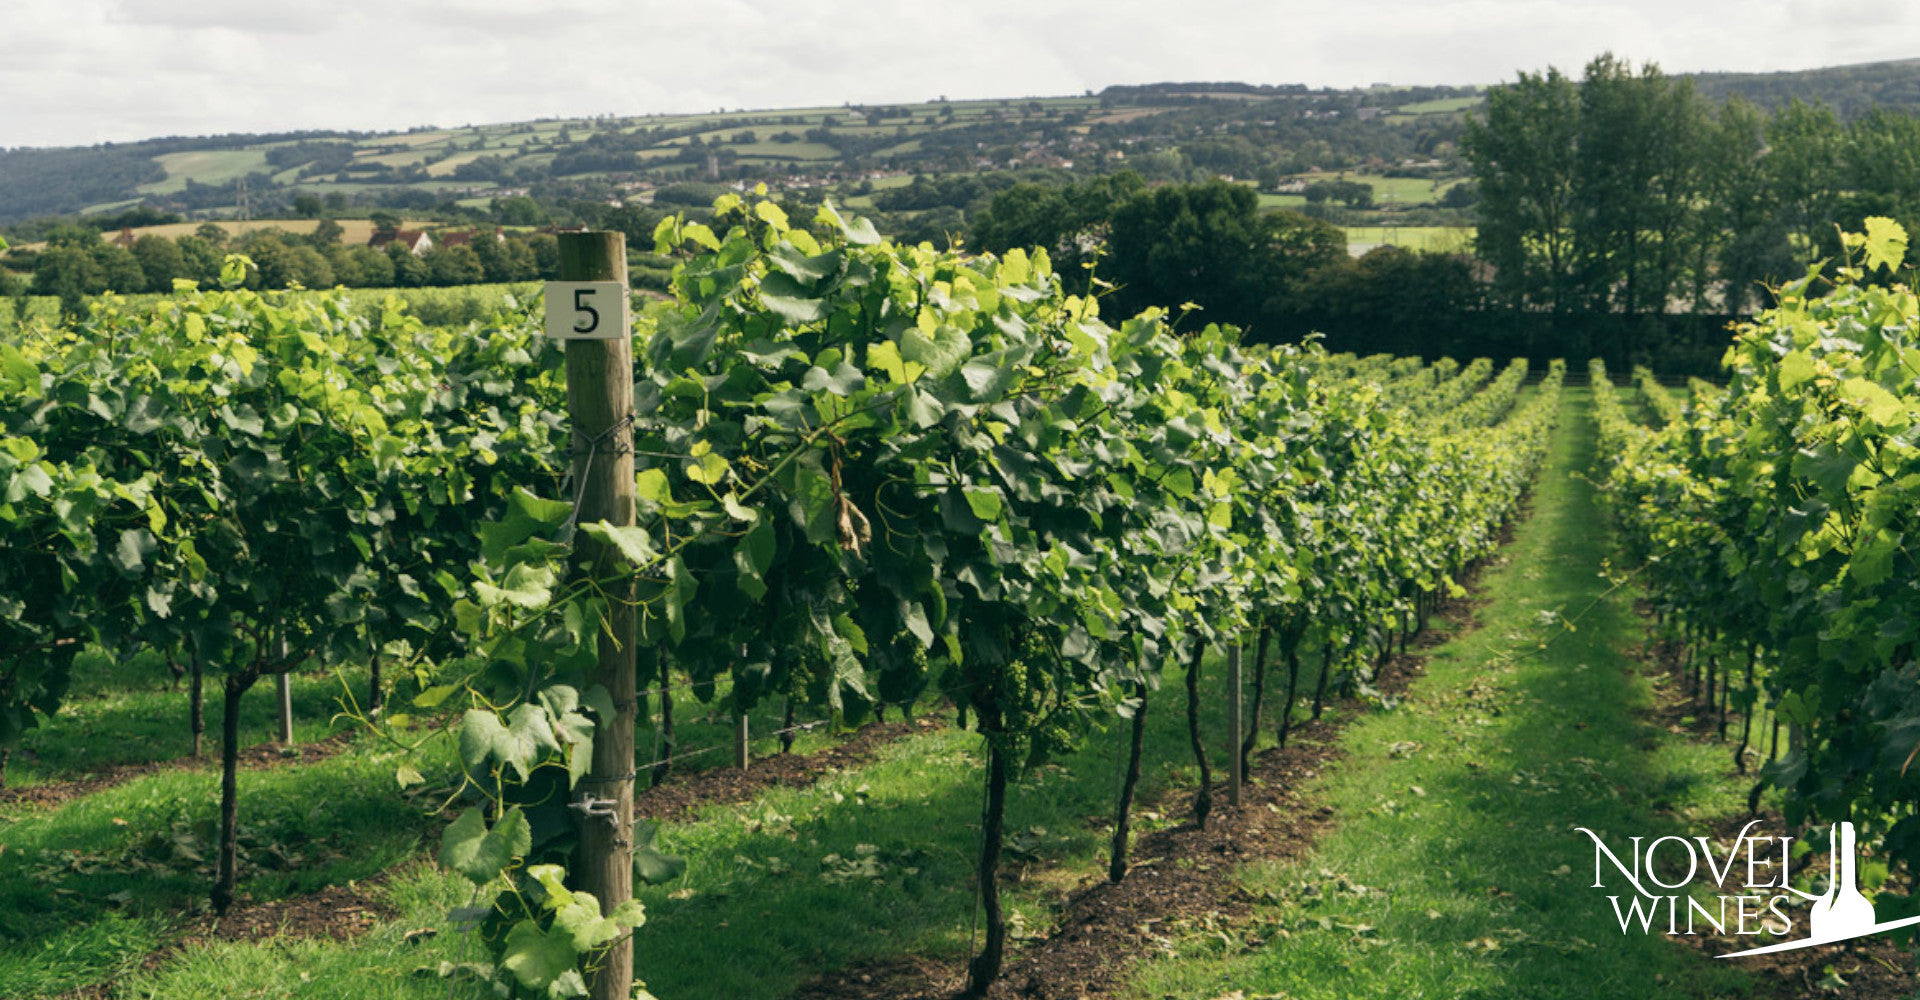 Vineyard at Aldwick Estate, one of our favourite British summer wine producers